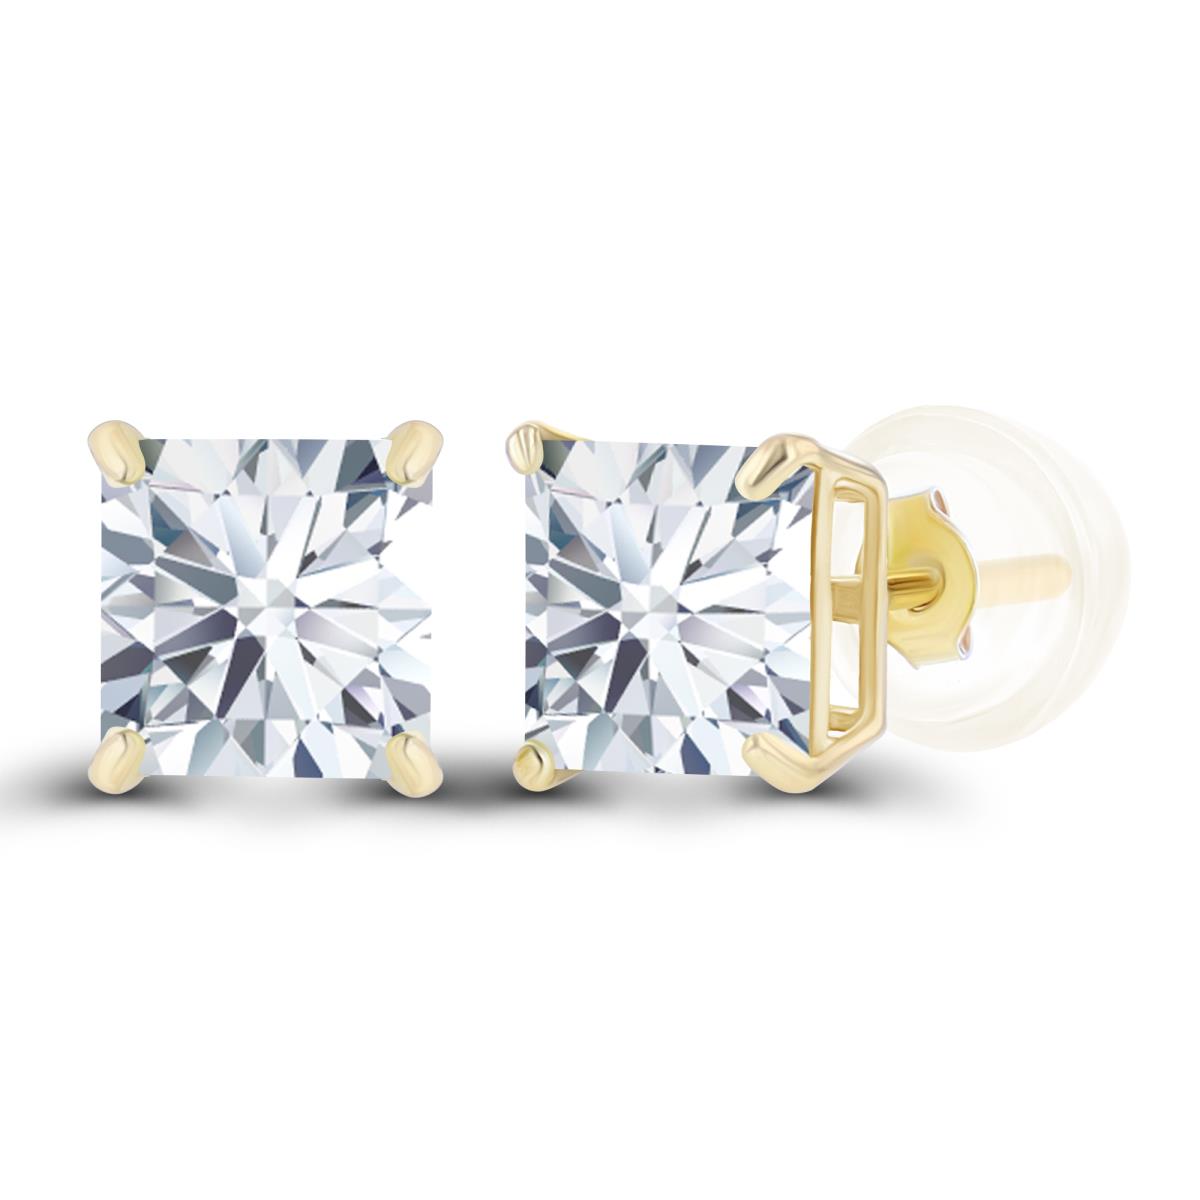 14K Yellow Gold 5mm Square Created White Sapphire Basket Stud Earrings